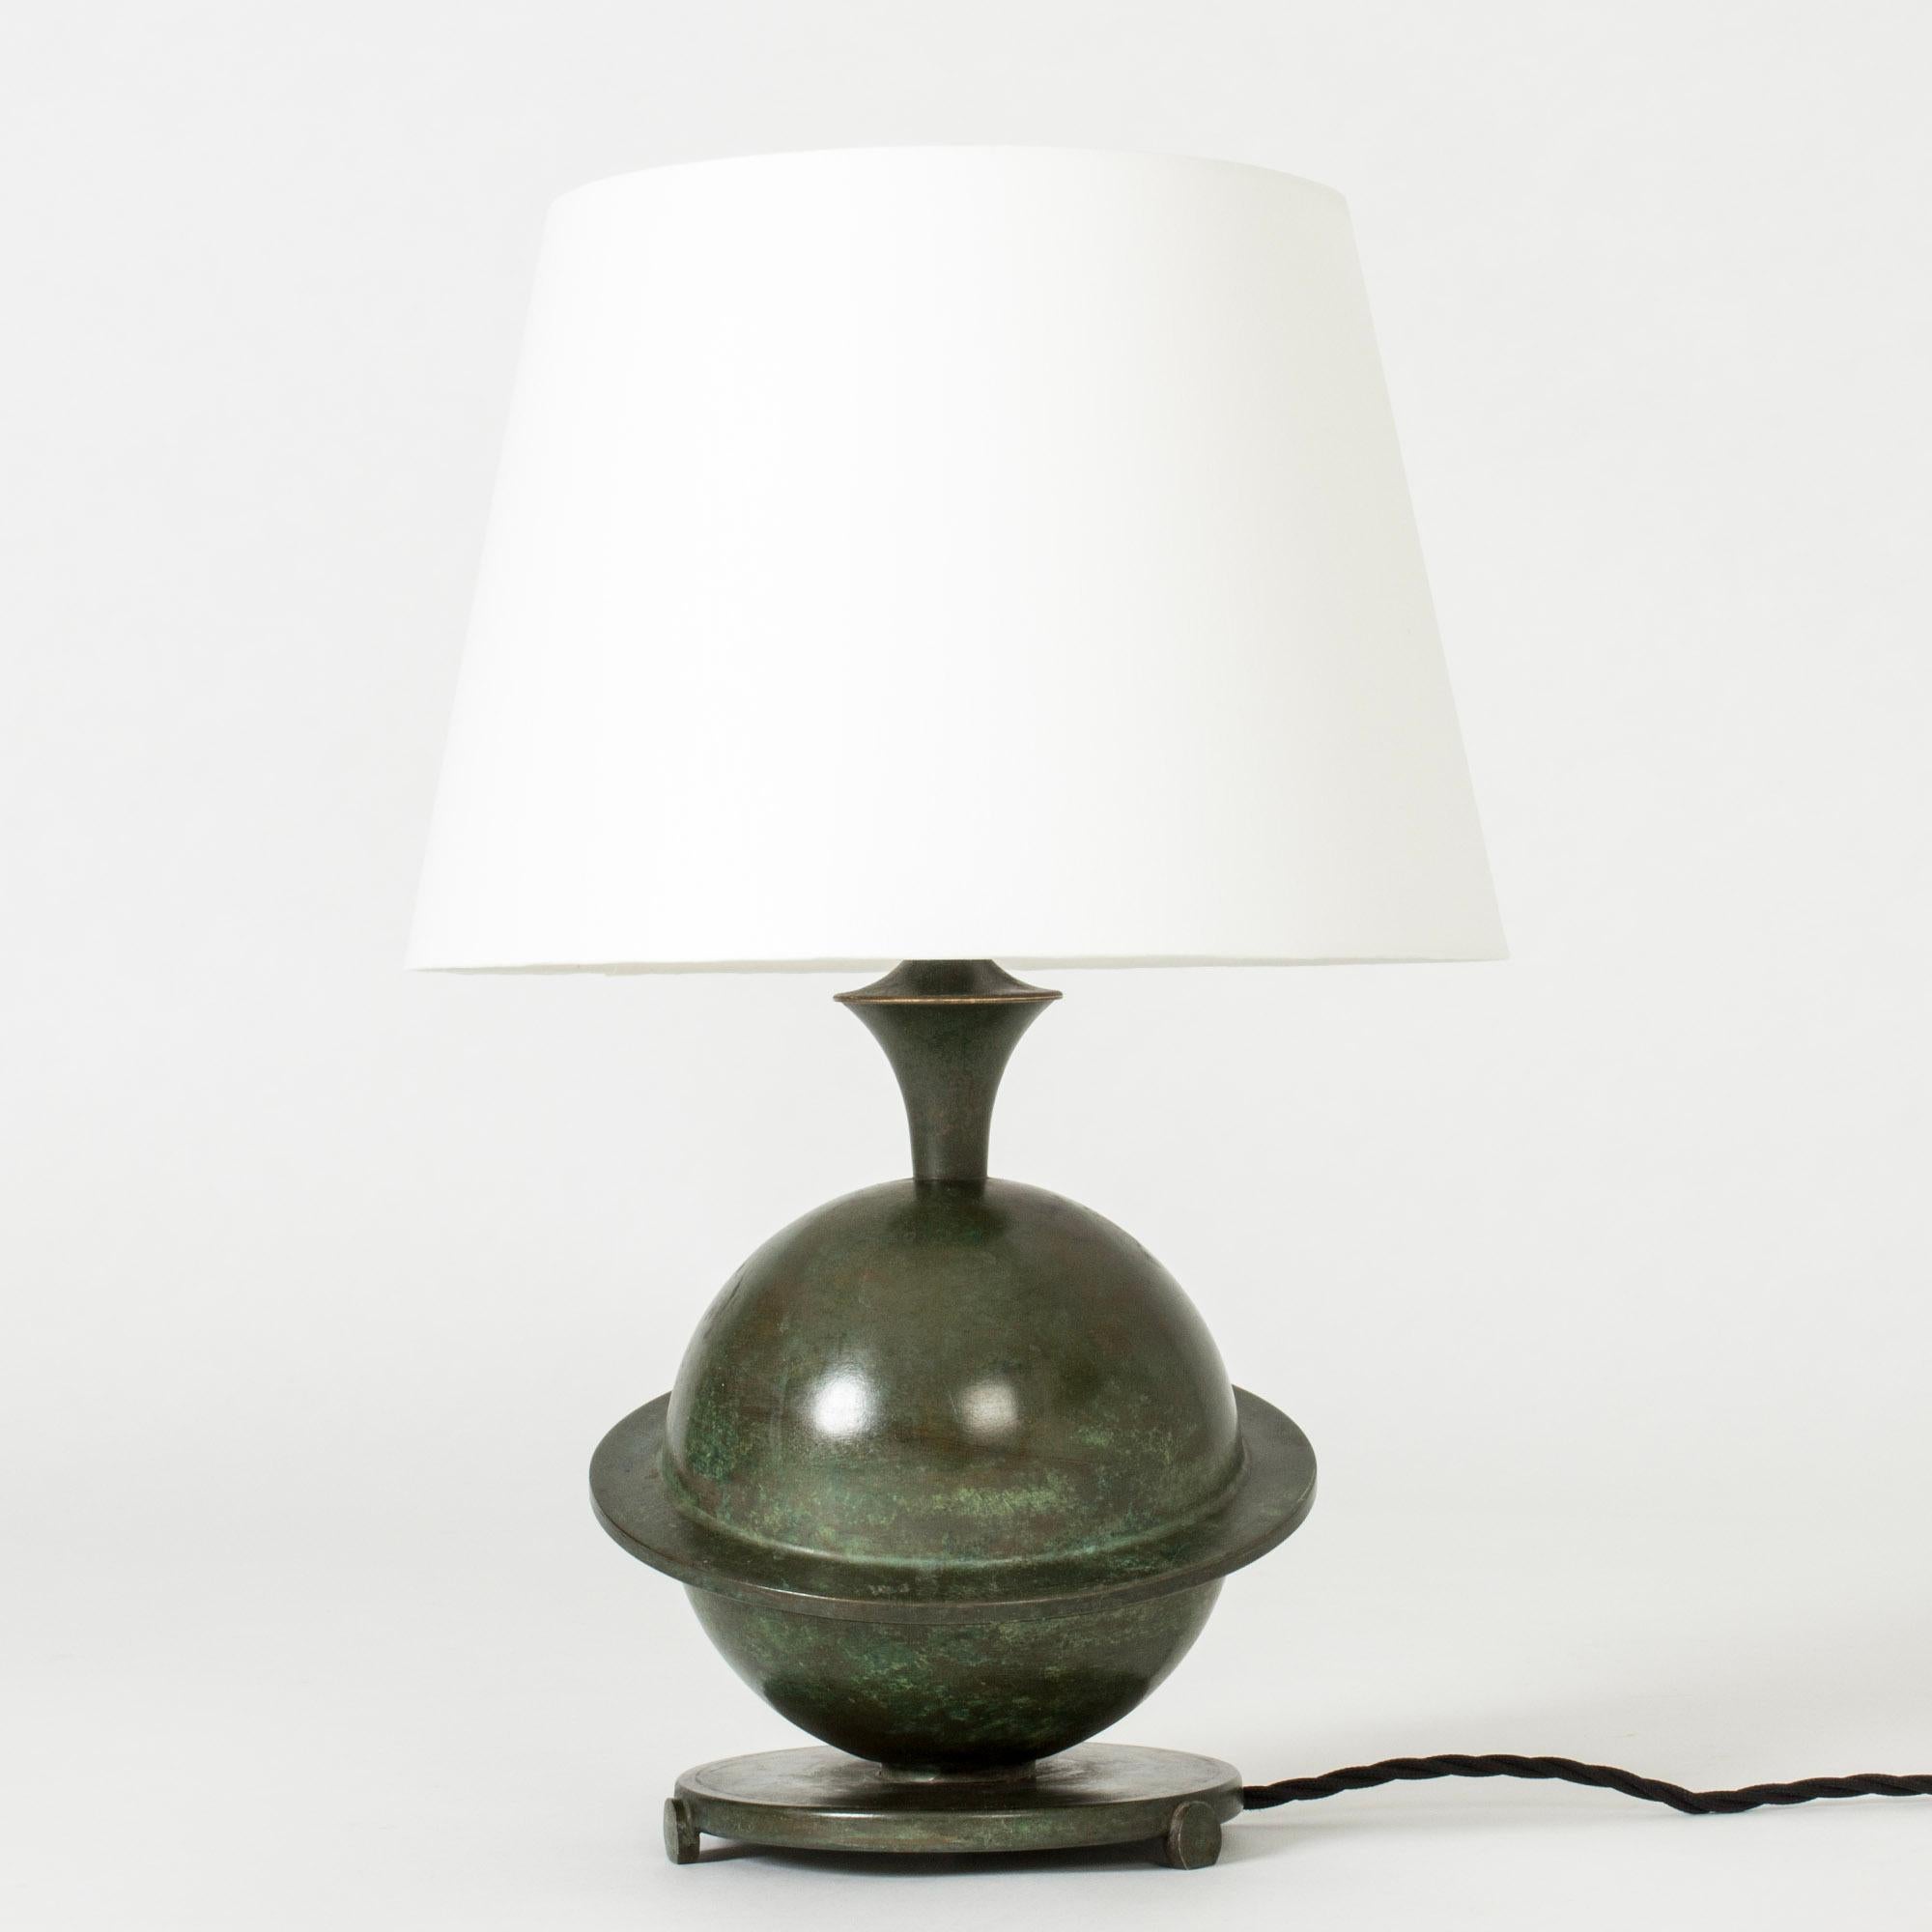 Lovely Art Deco table lamp, made from bronze. Very decorative design with the base in the form of Saturn. Nice patina.